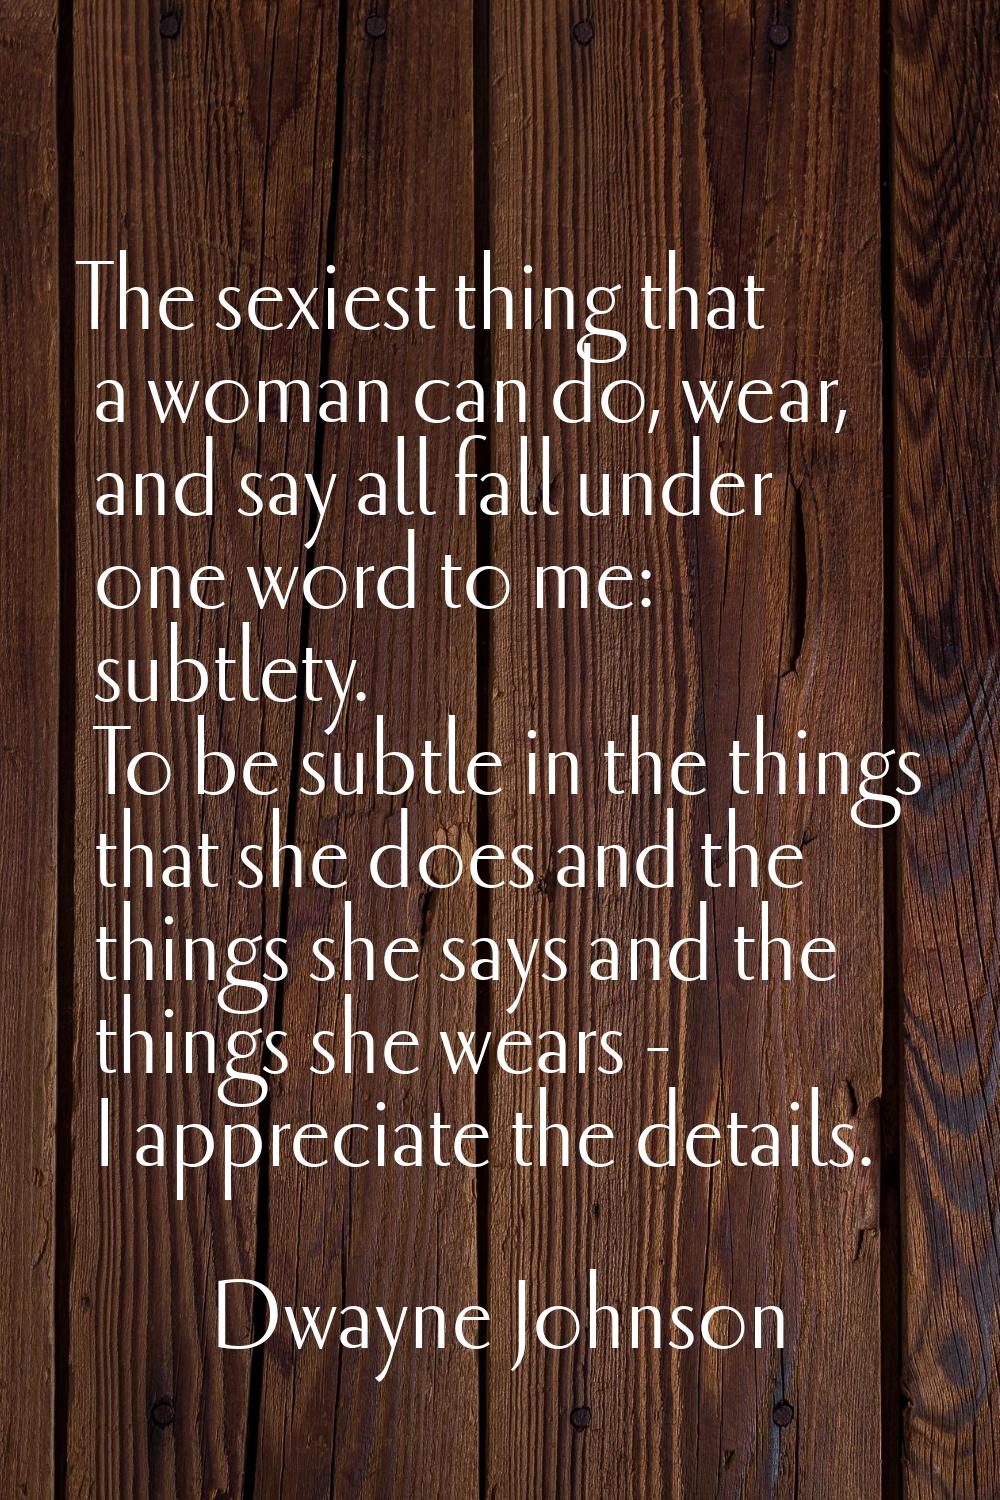 The sexiest thing that a woman can do, wear, and say all fall under one word to me: subtlety. To be